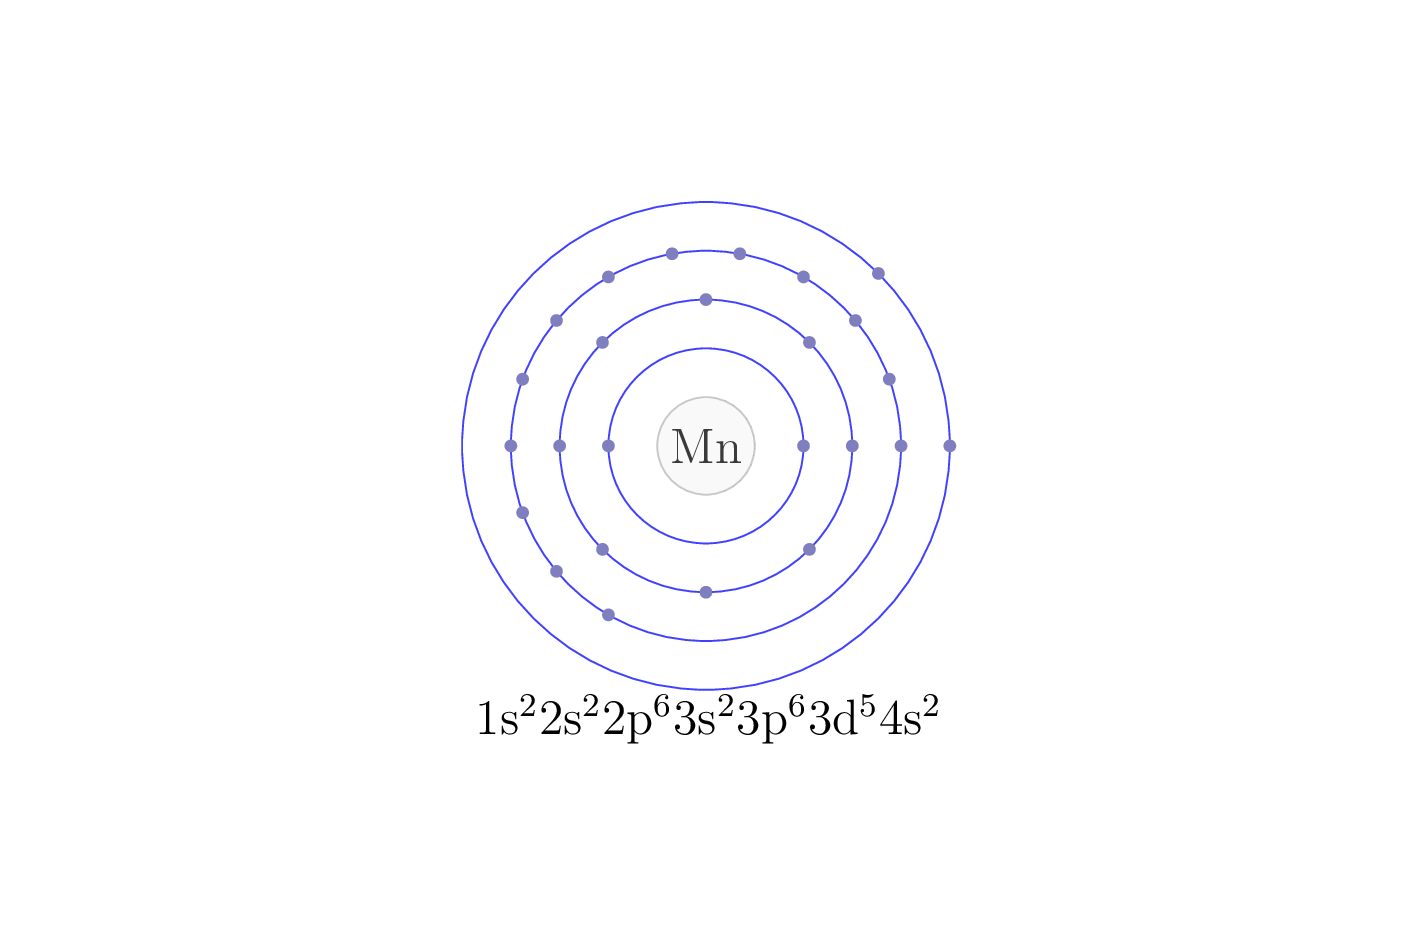 electron configuration of element Mn